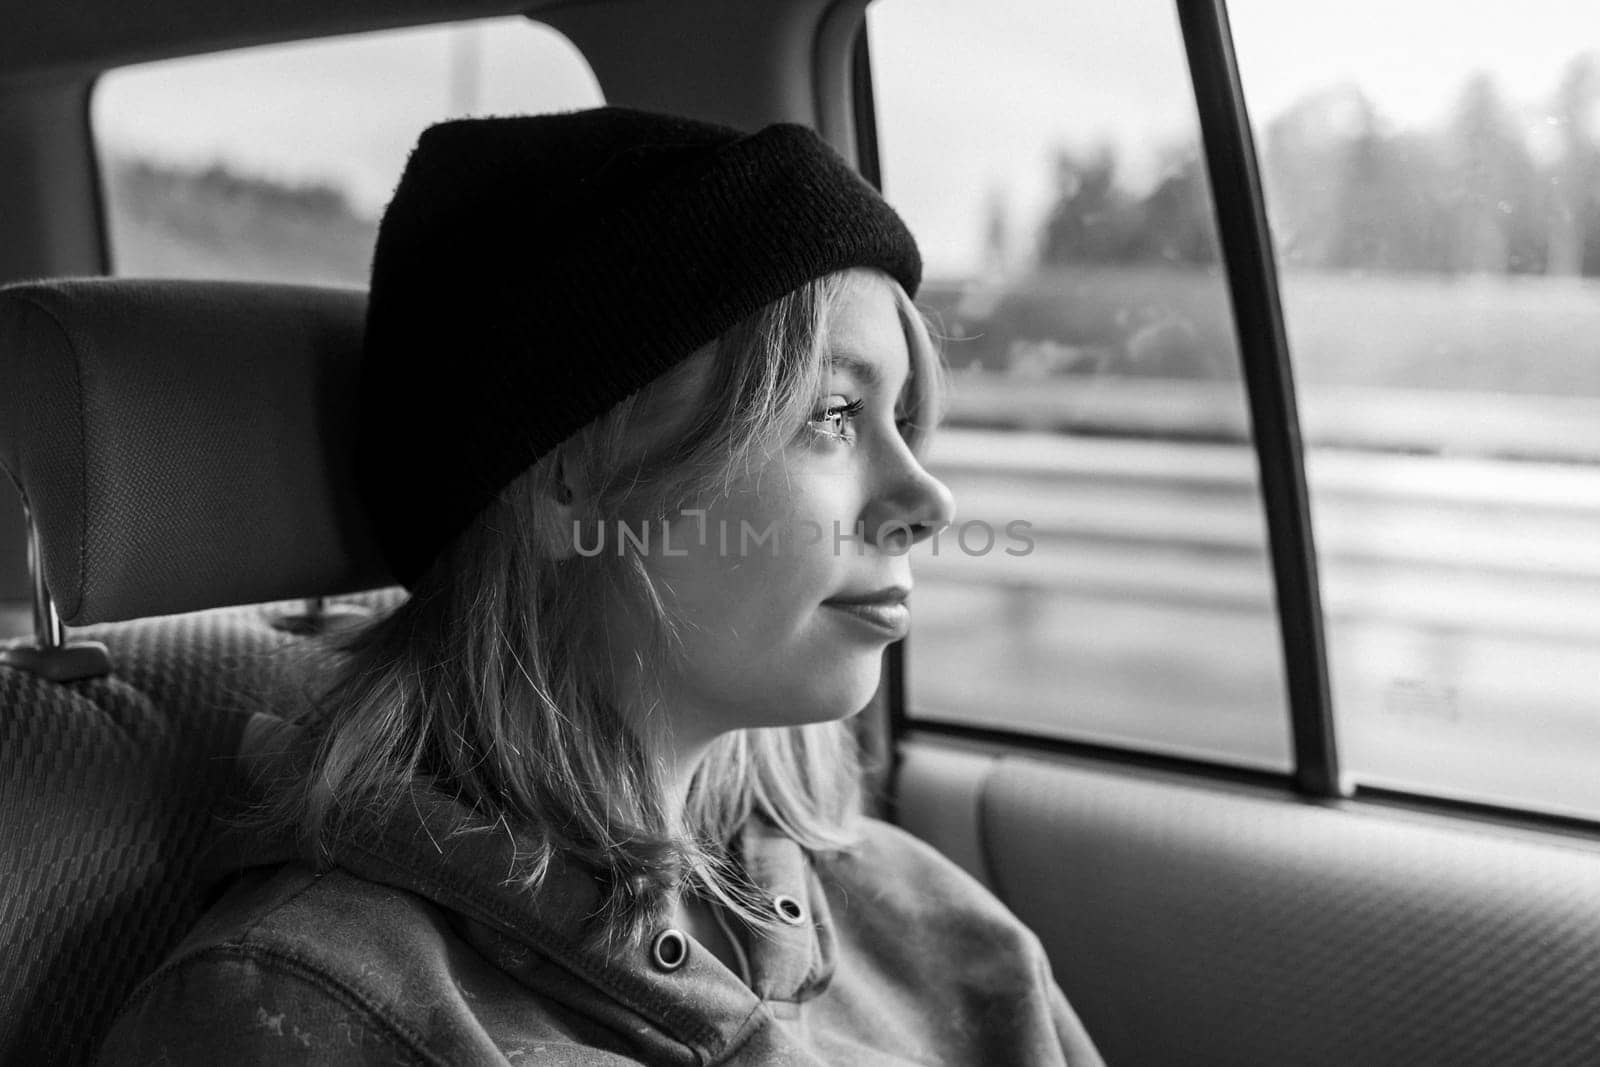 black and white photo. A pretty girl with pink hair in a black knitted hat in the back seat of a car, looking out the window, she is immersed in thoughts about her future, about opportunities. Traveling by car